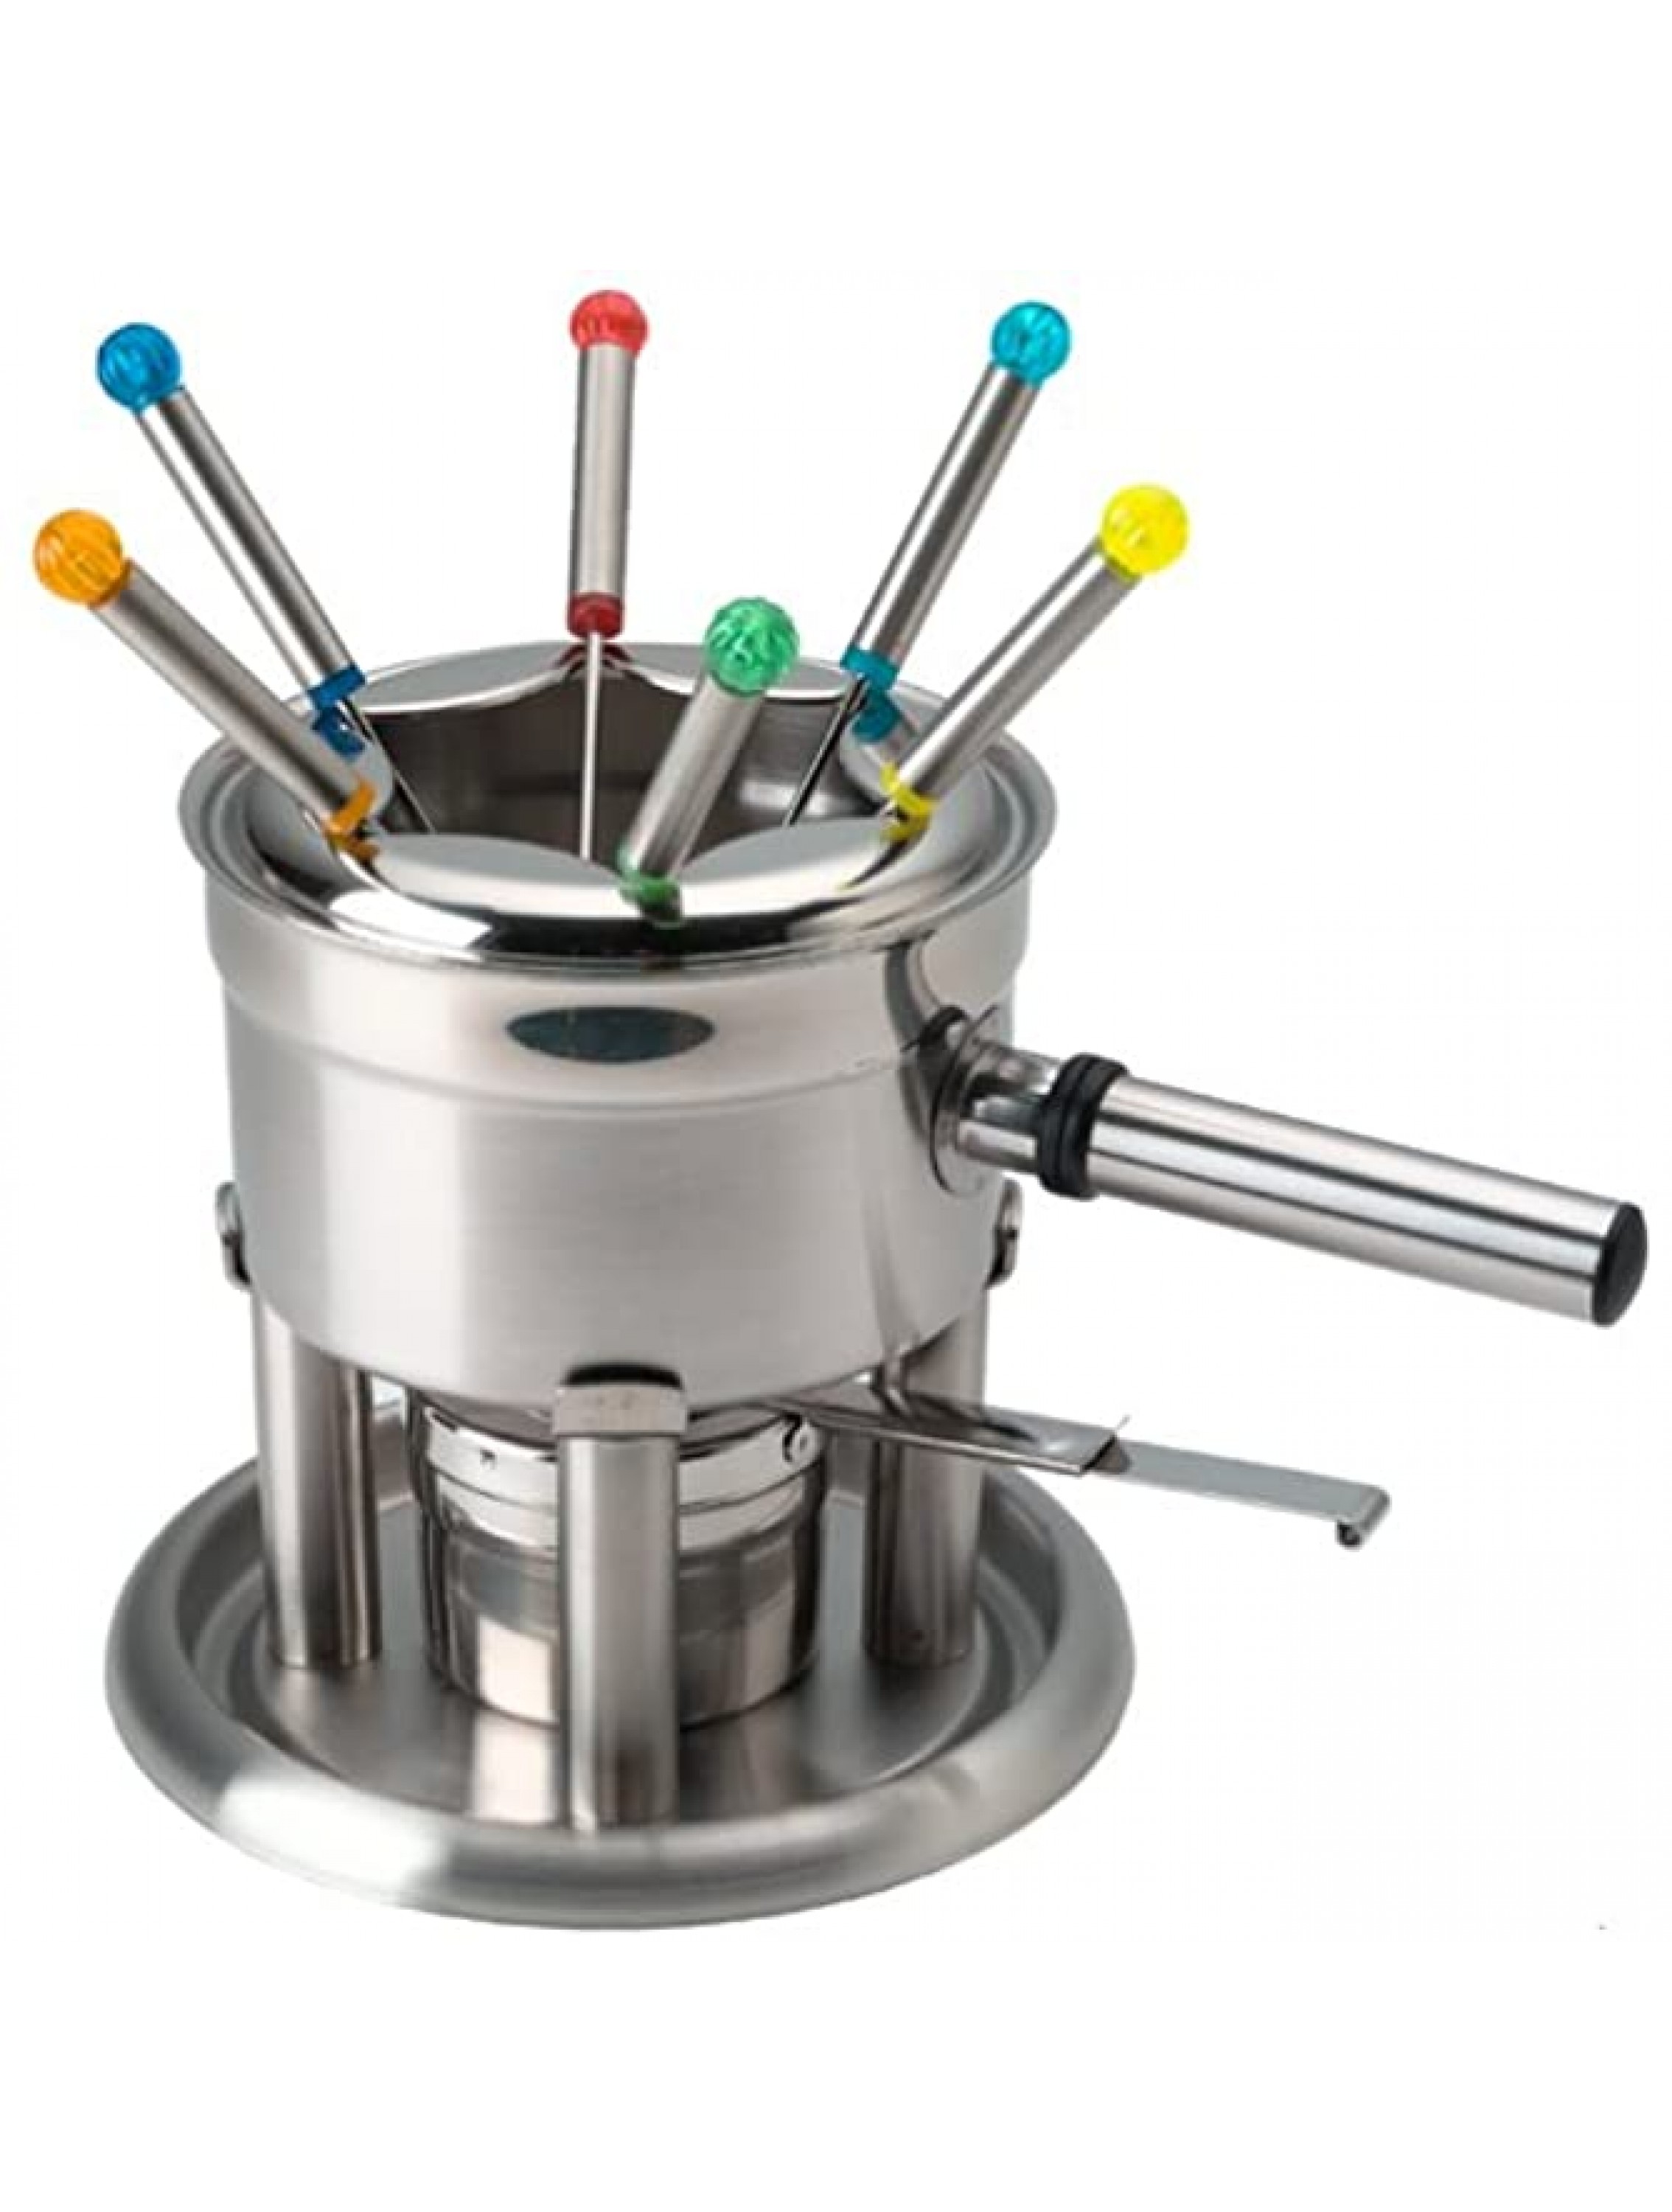 Hoffritz Stainless Steel Fondue Set With 6 Forks - B3W8K58MO